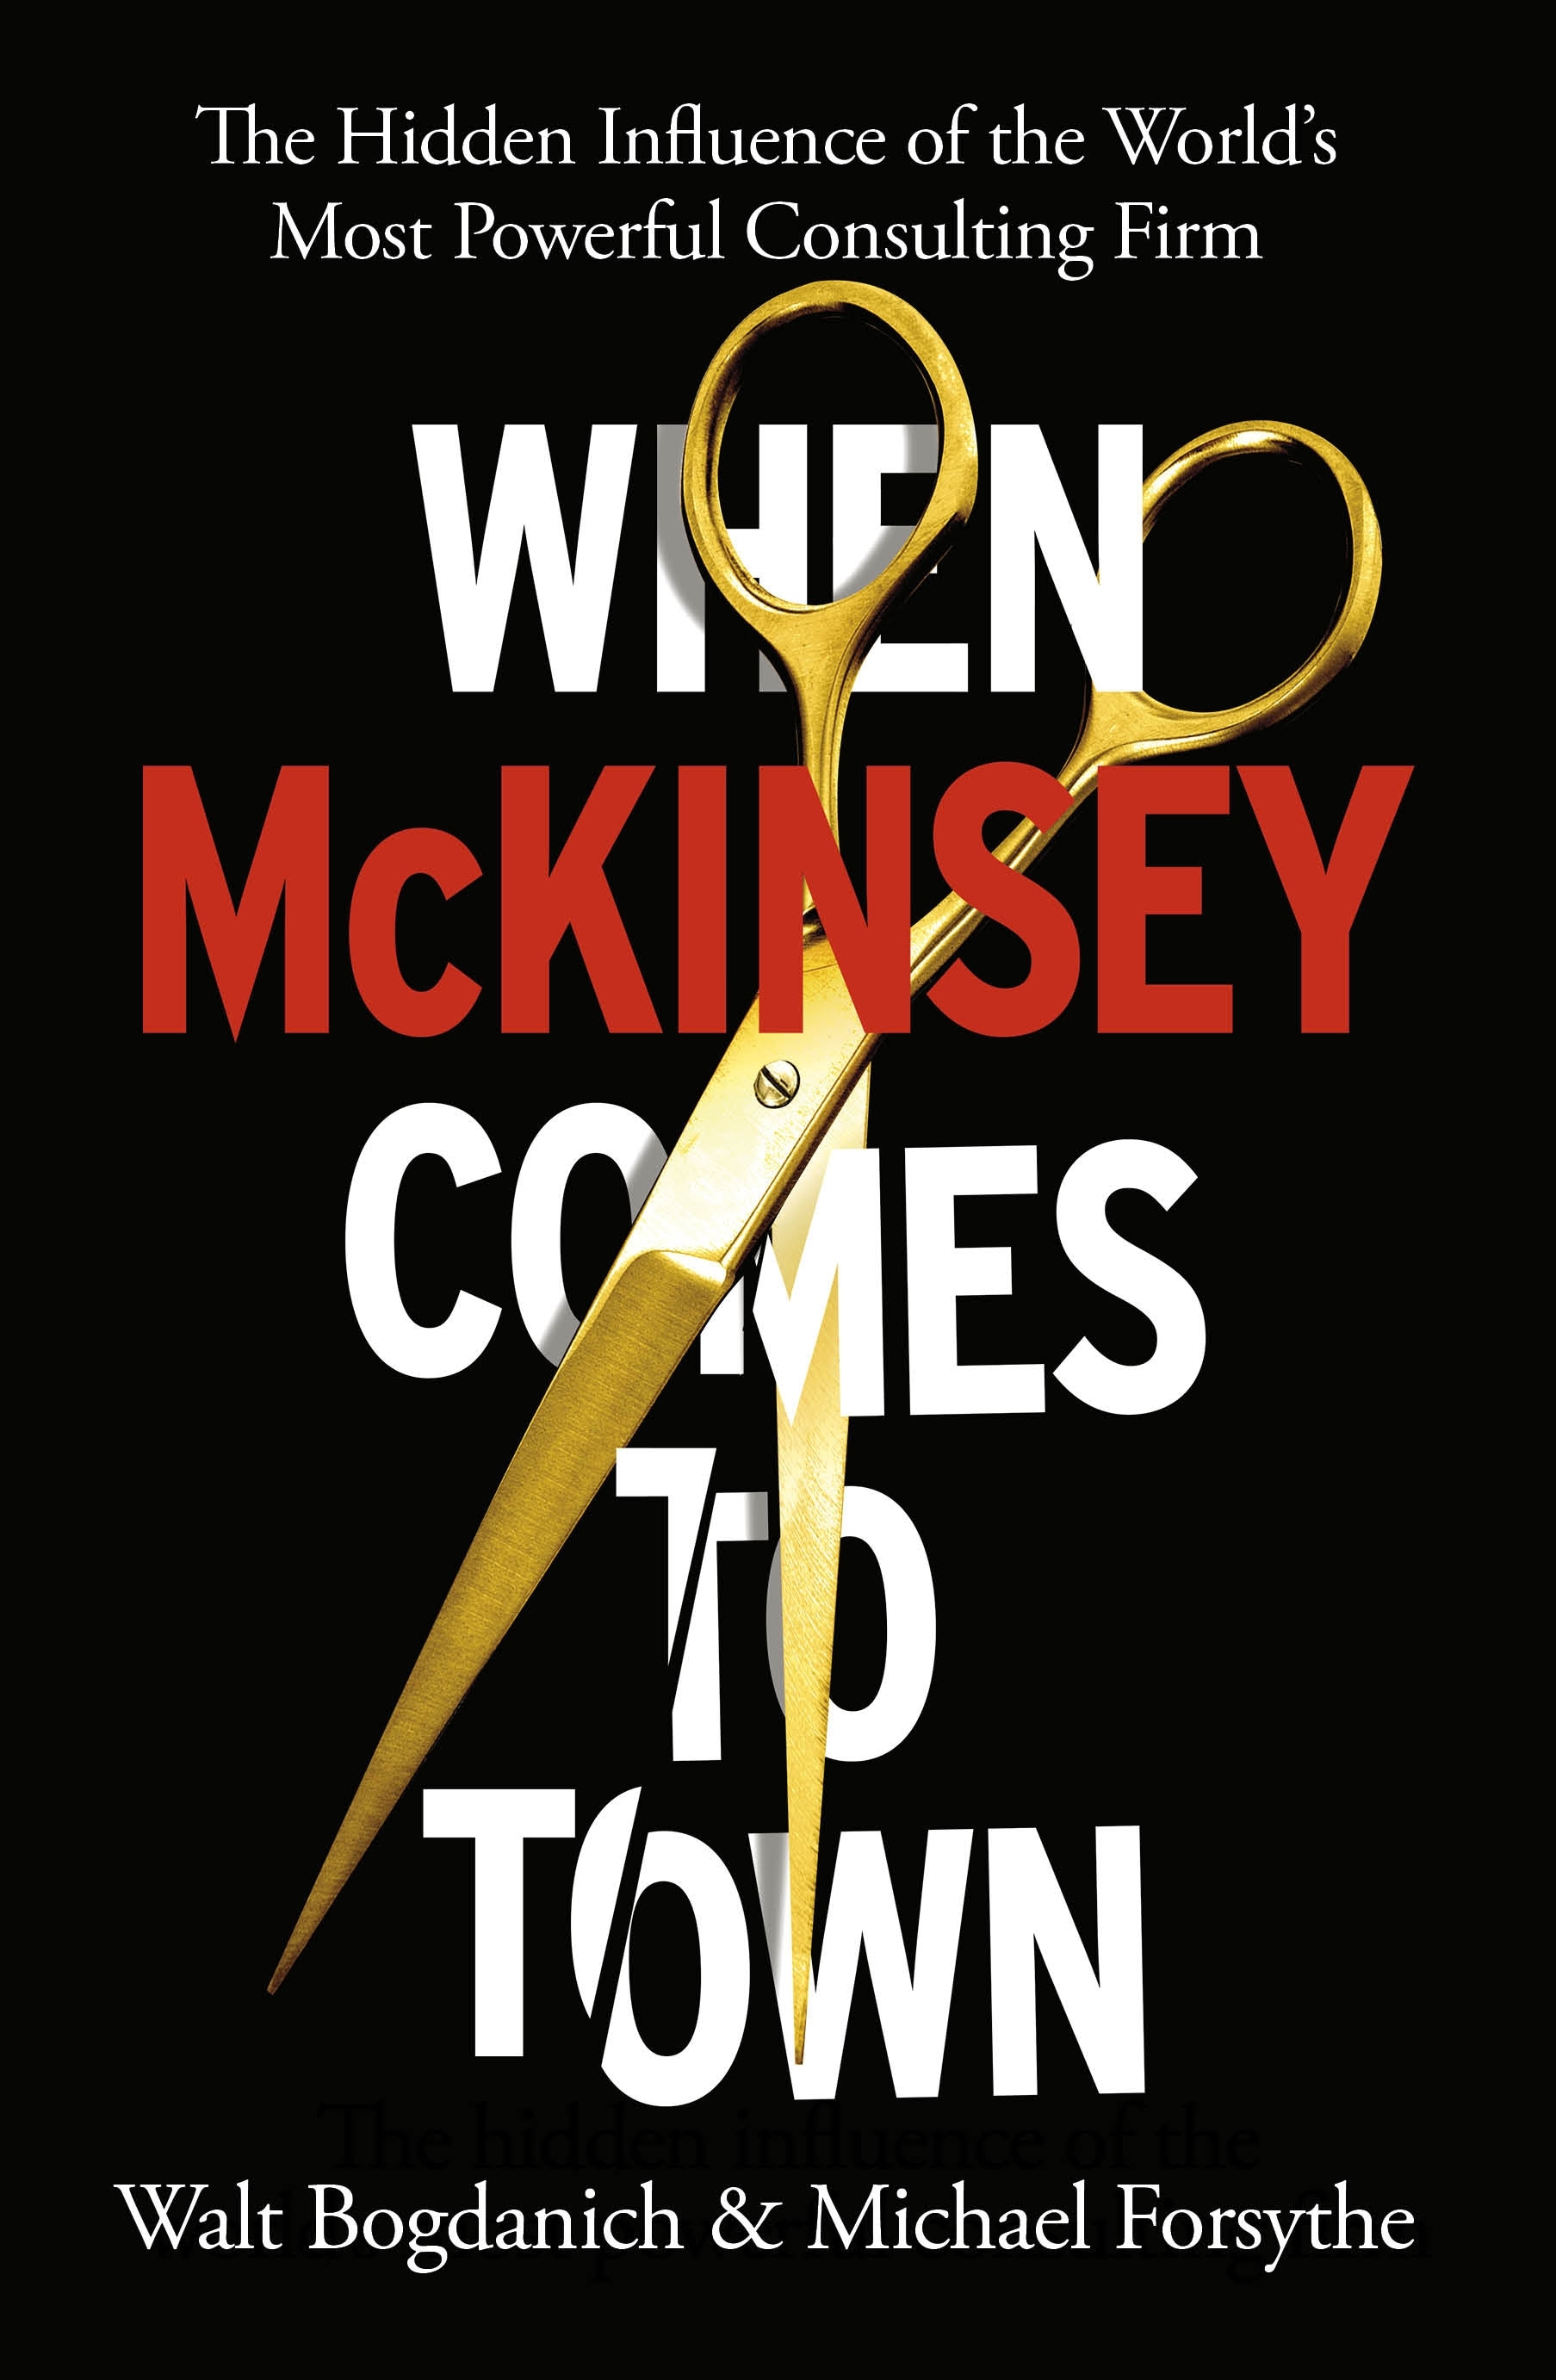 Book “When McKinsey Comes to Town” by Walt Bogdanich, Michael Forsythe — October 6, 2022